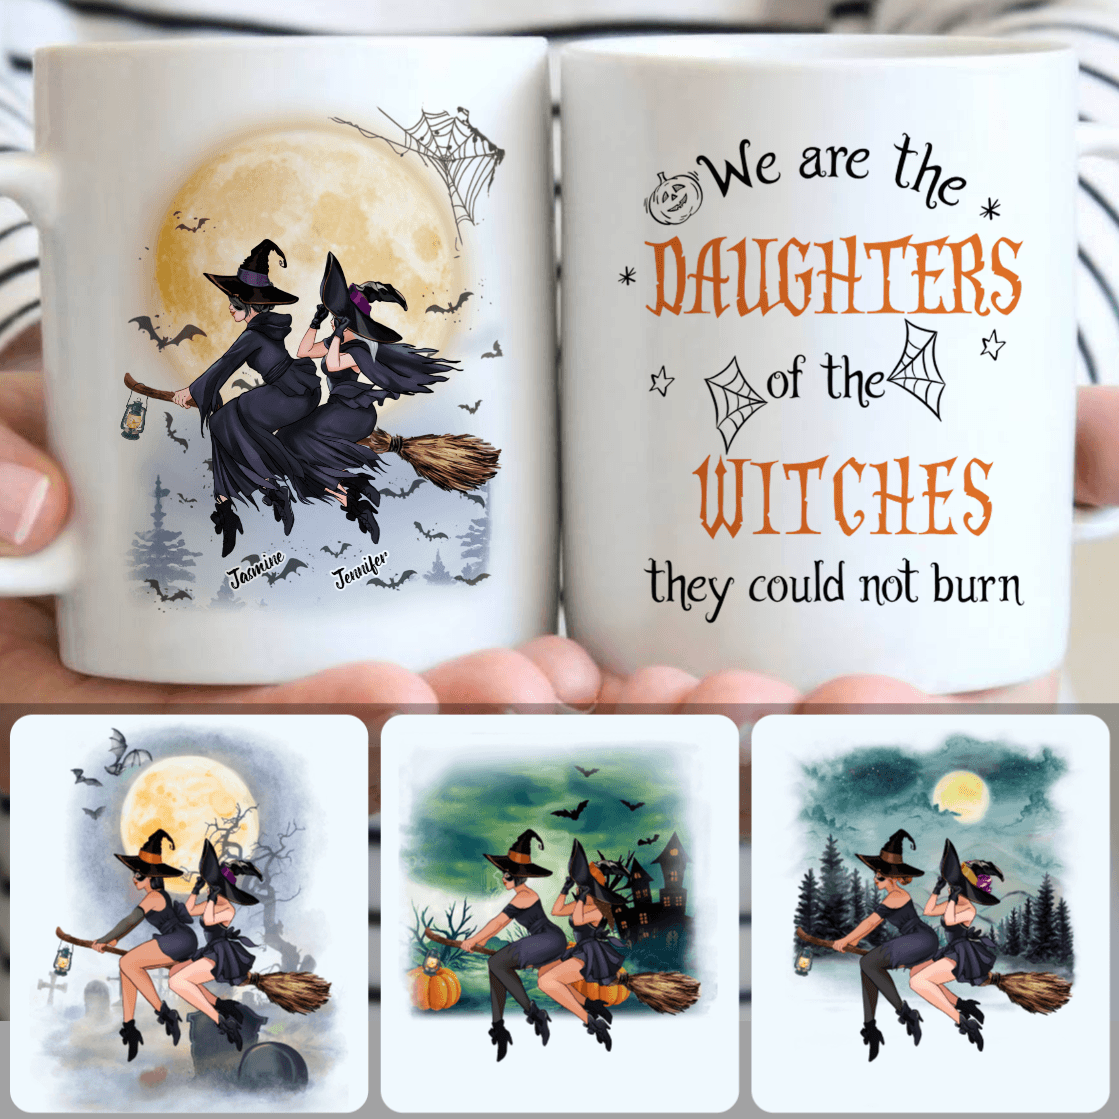 Personalized Mug, Unique Halloween Gifts, 2 Sisters - Witches Flying Customized Coffee Mug With Names